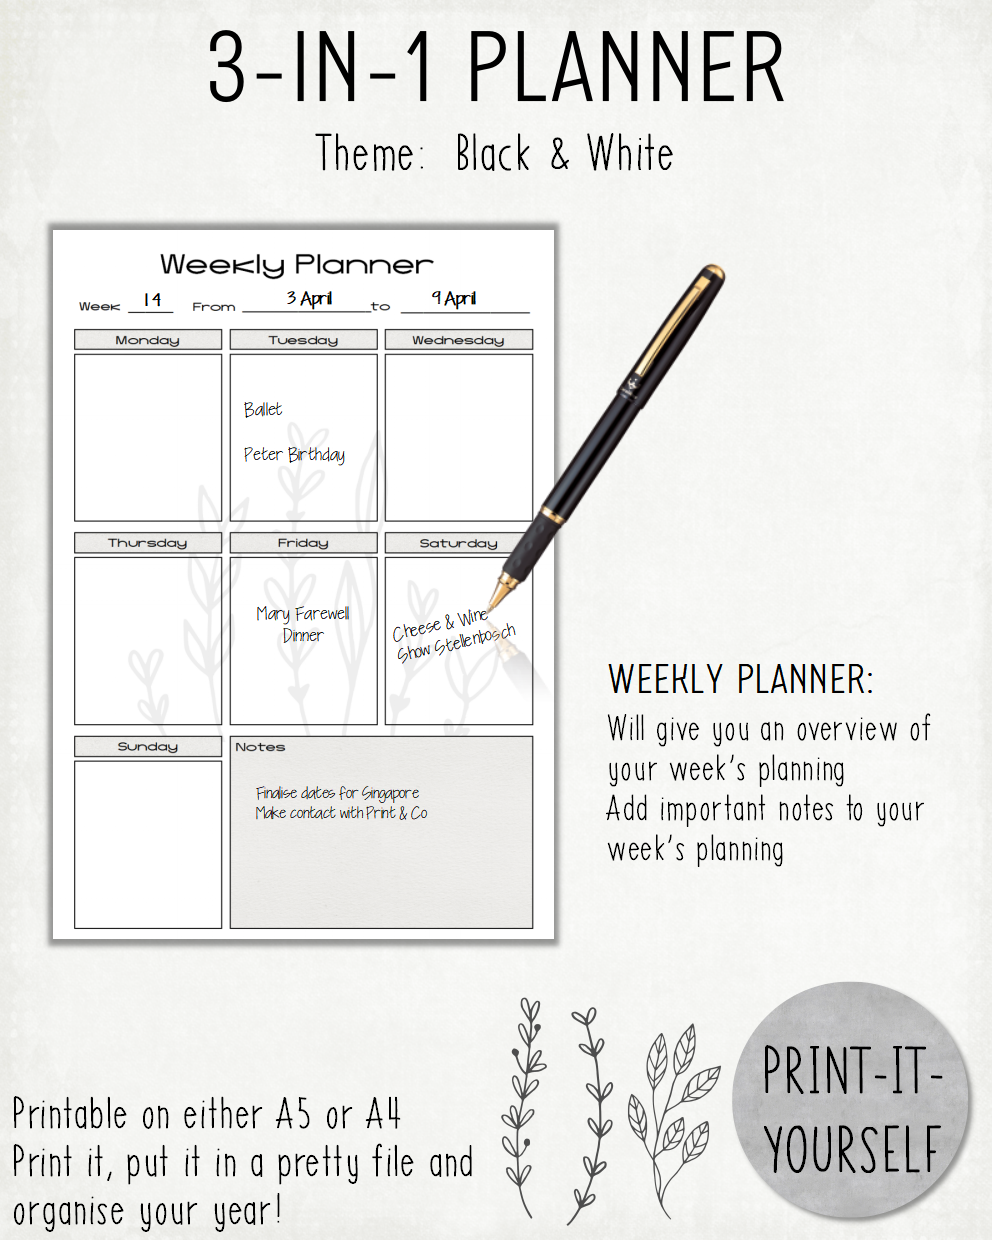 READY TO PRINT:  3-in-1 Planner - Black & White